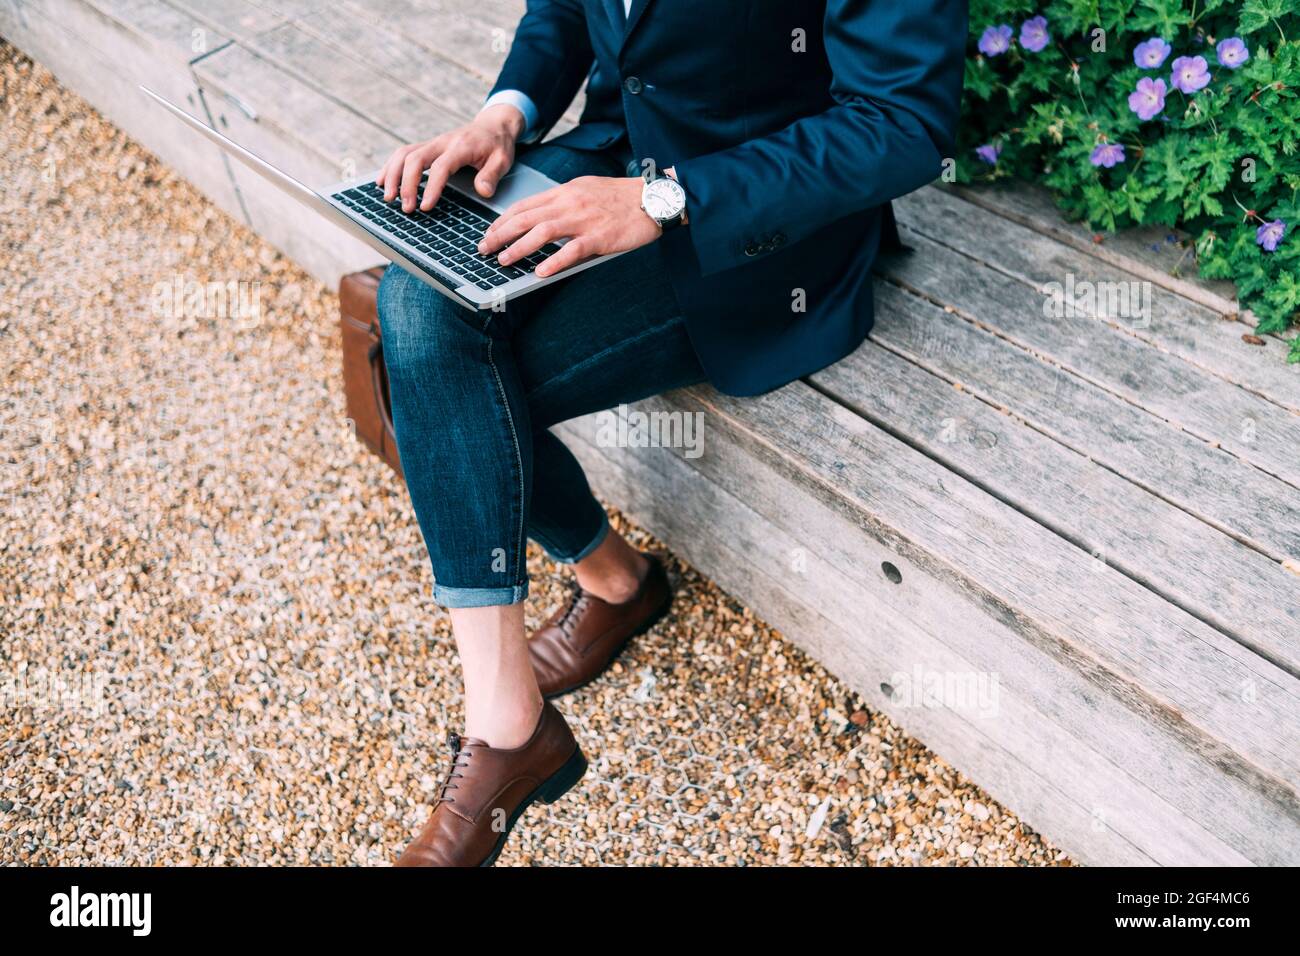 Businessman using laptop while sitting with legs crossed at knee on bench Stock Photo